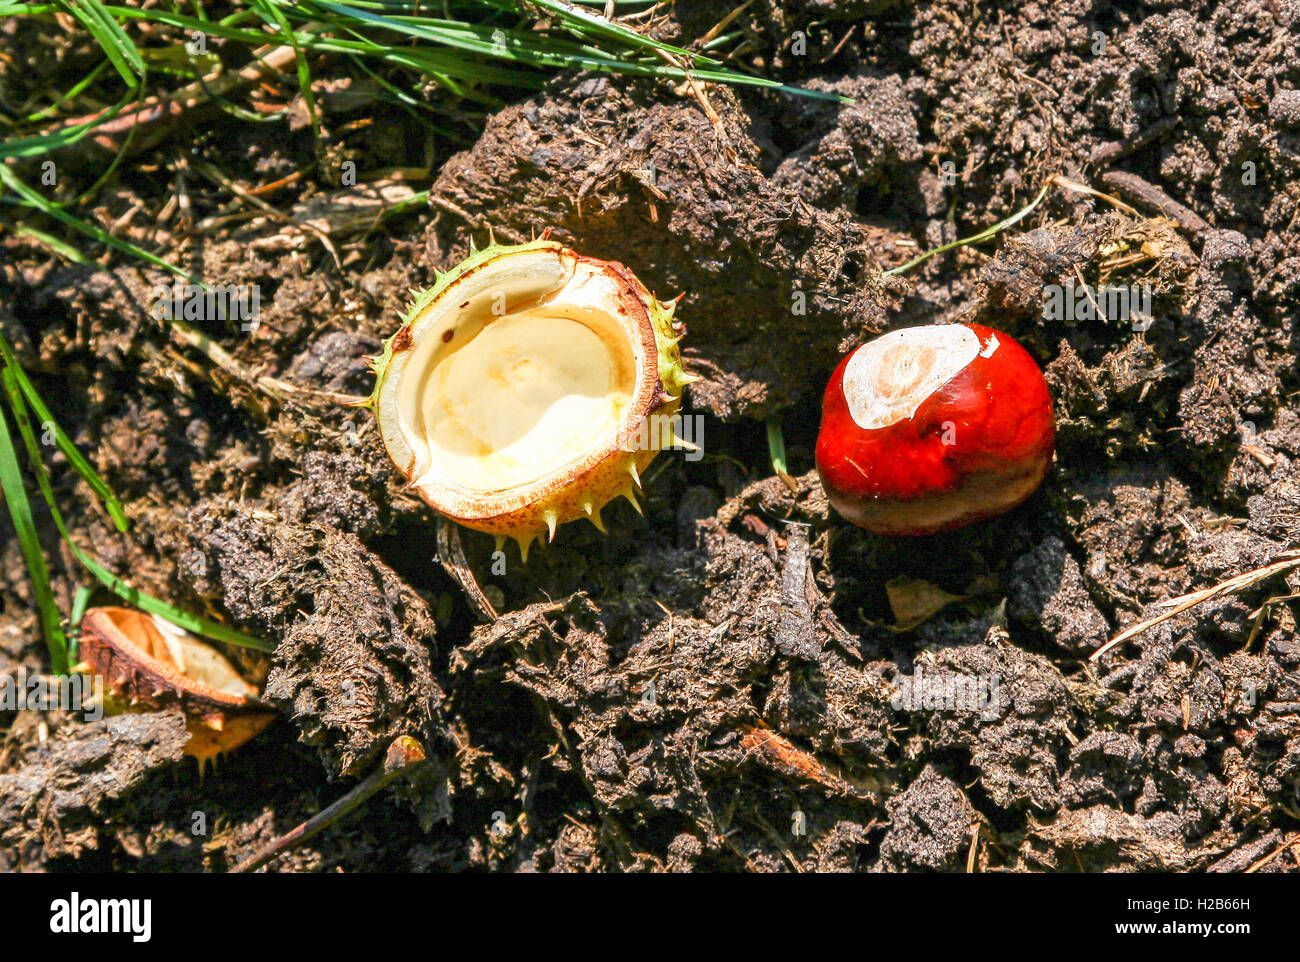 A conker the fruit or seed of a horse-chestnut or conker tree (Aesculus hippocastanum) Stock Photo